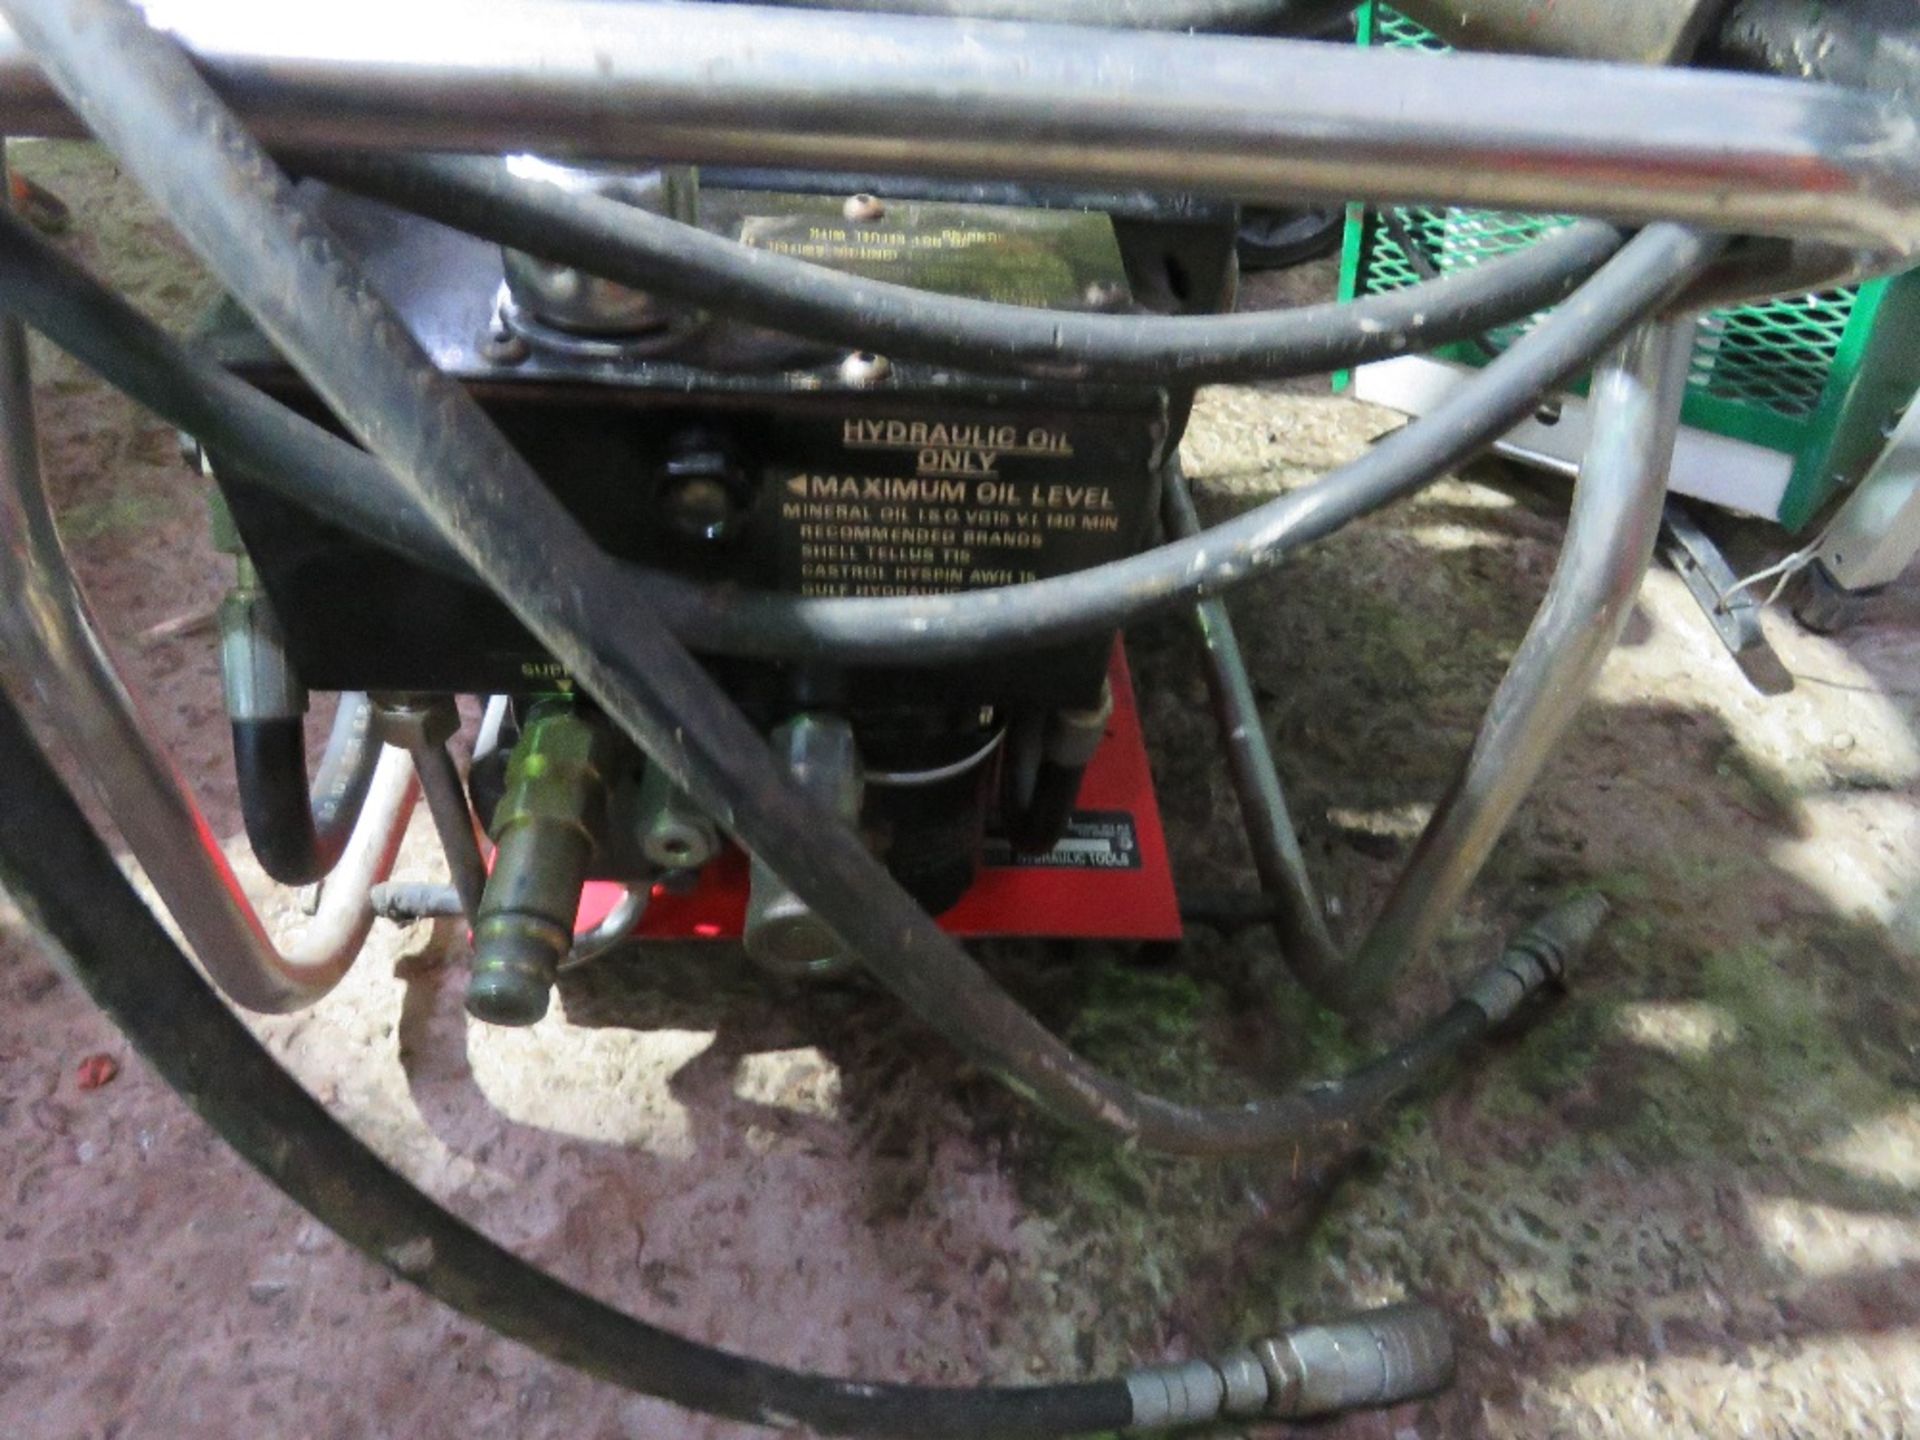 SMALL SIZED PACEBREAK HYDRAULIC BREAKER WITH HOSE AND GUN. - Image 3 of 4